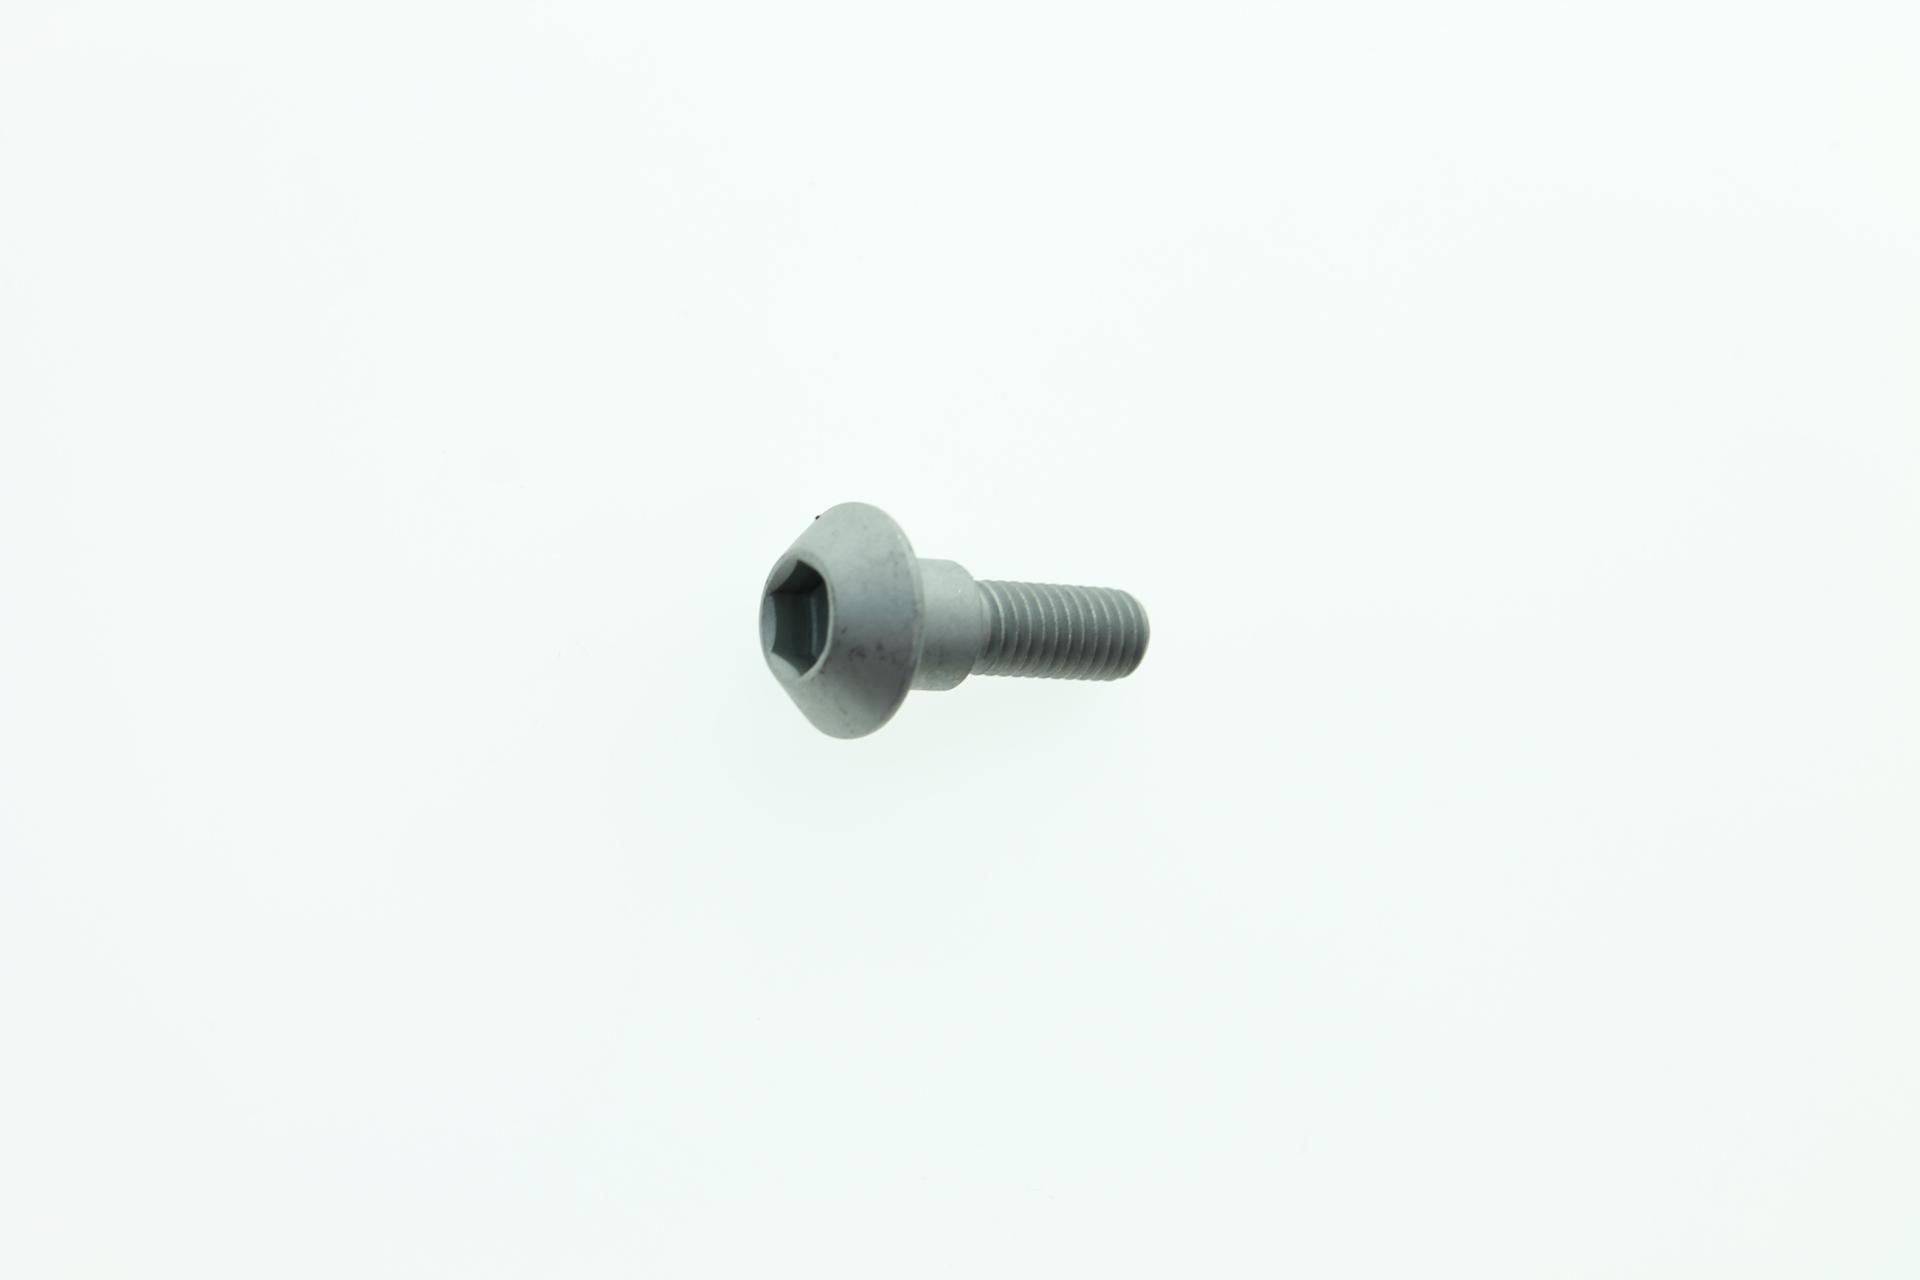 90109-064G6-00 Superseded by 90109-06254-00 - BOLT